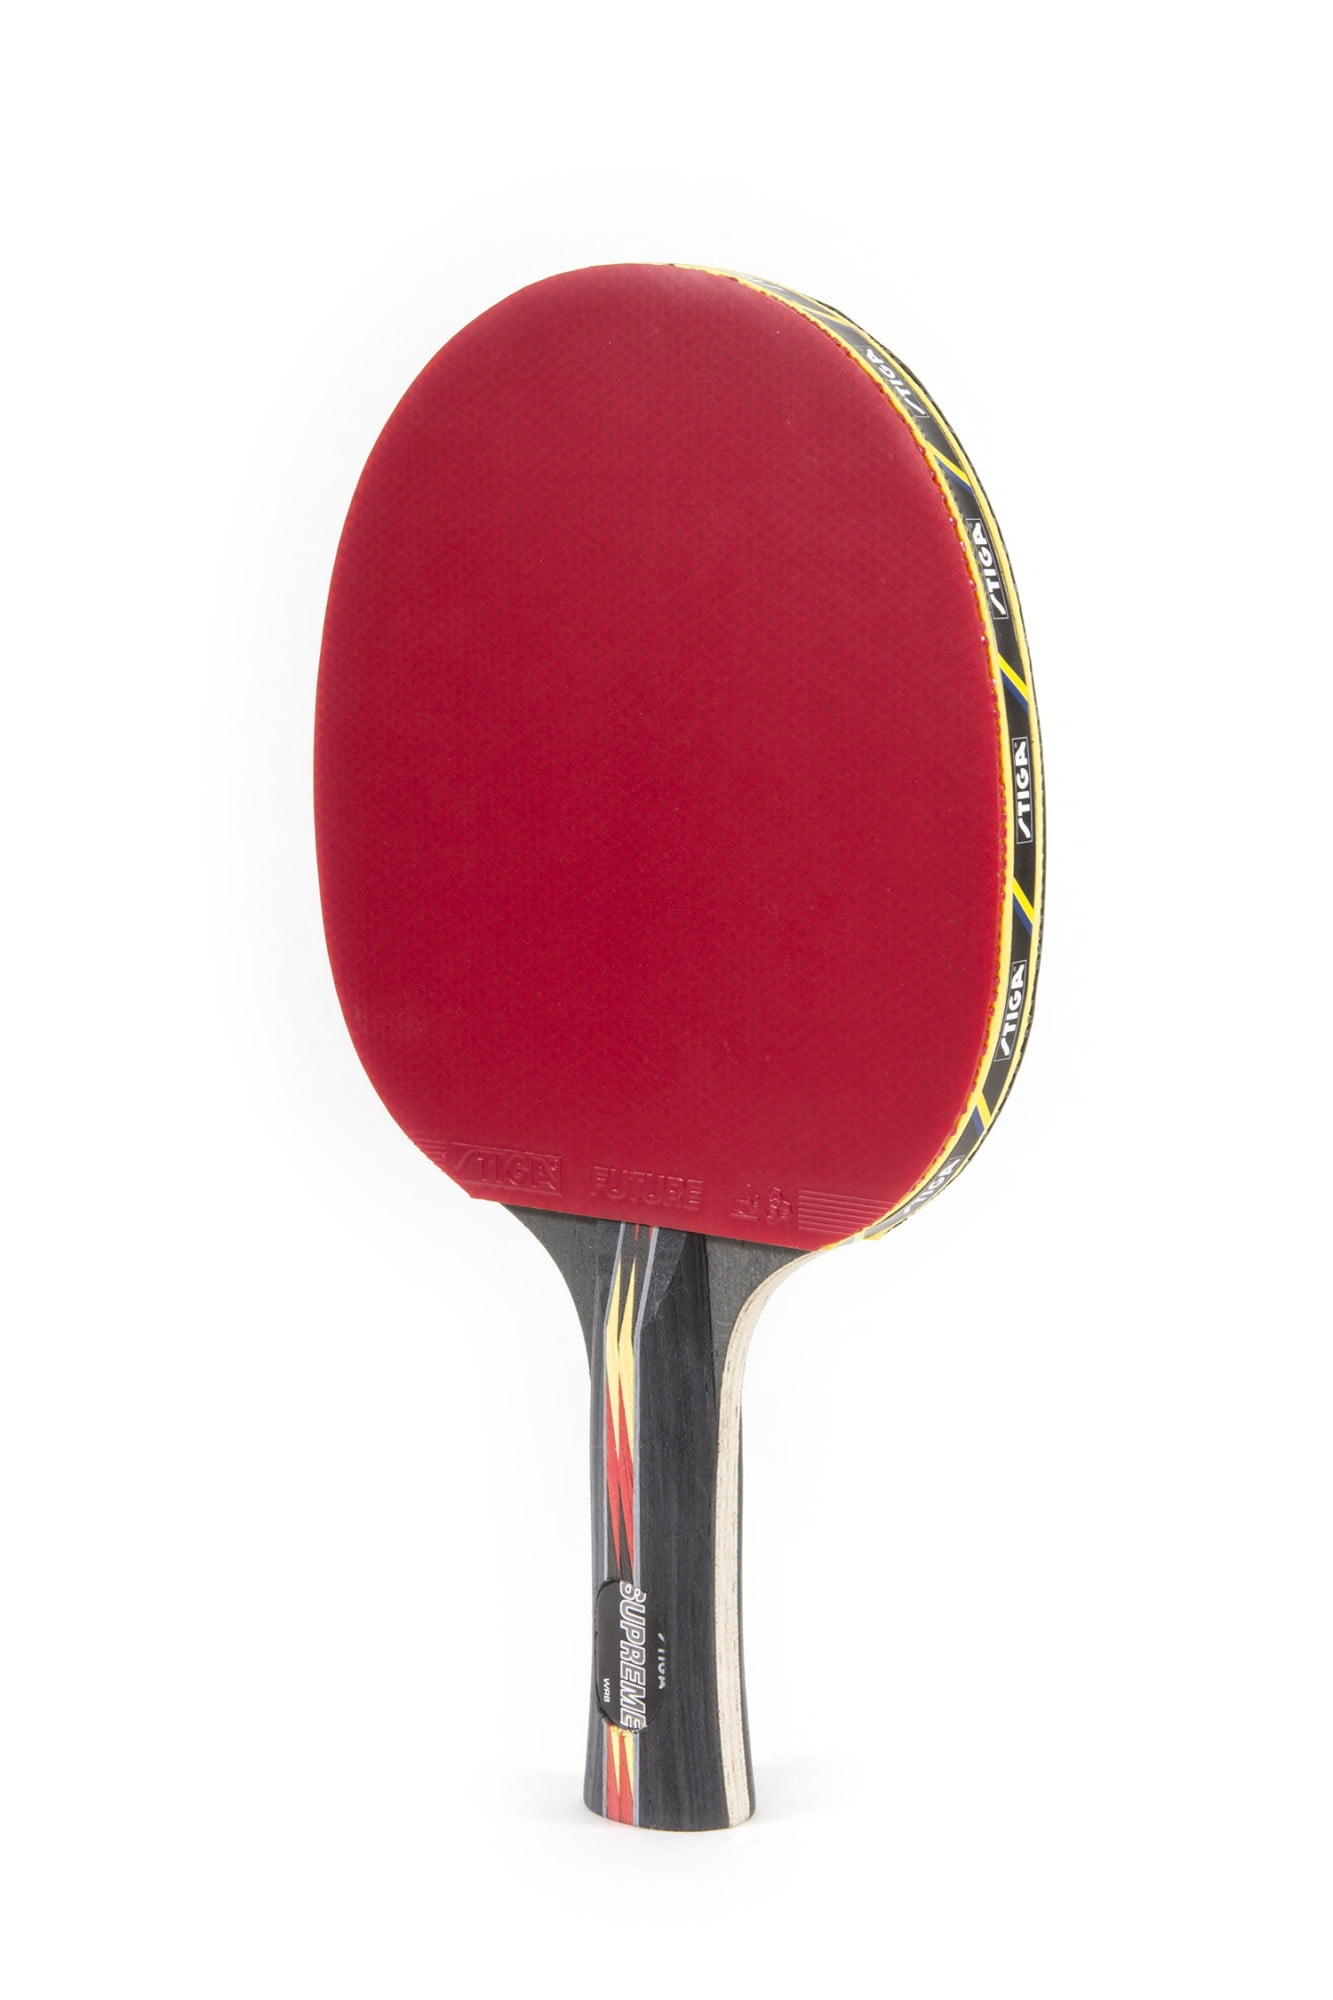 STIGA EVOLUTION PING PONG TABLE TENNIS PADDLE  NEW SEALED 